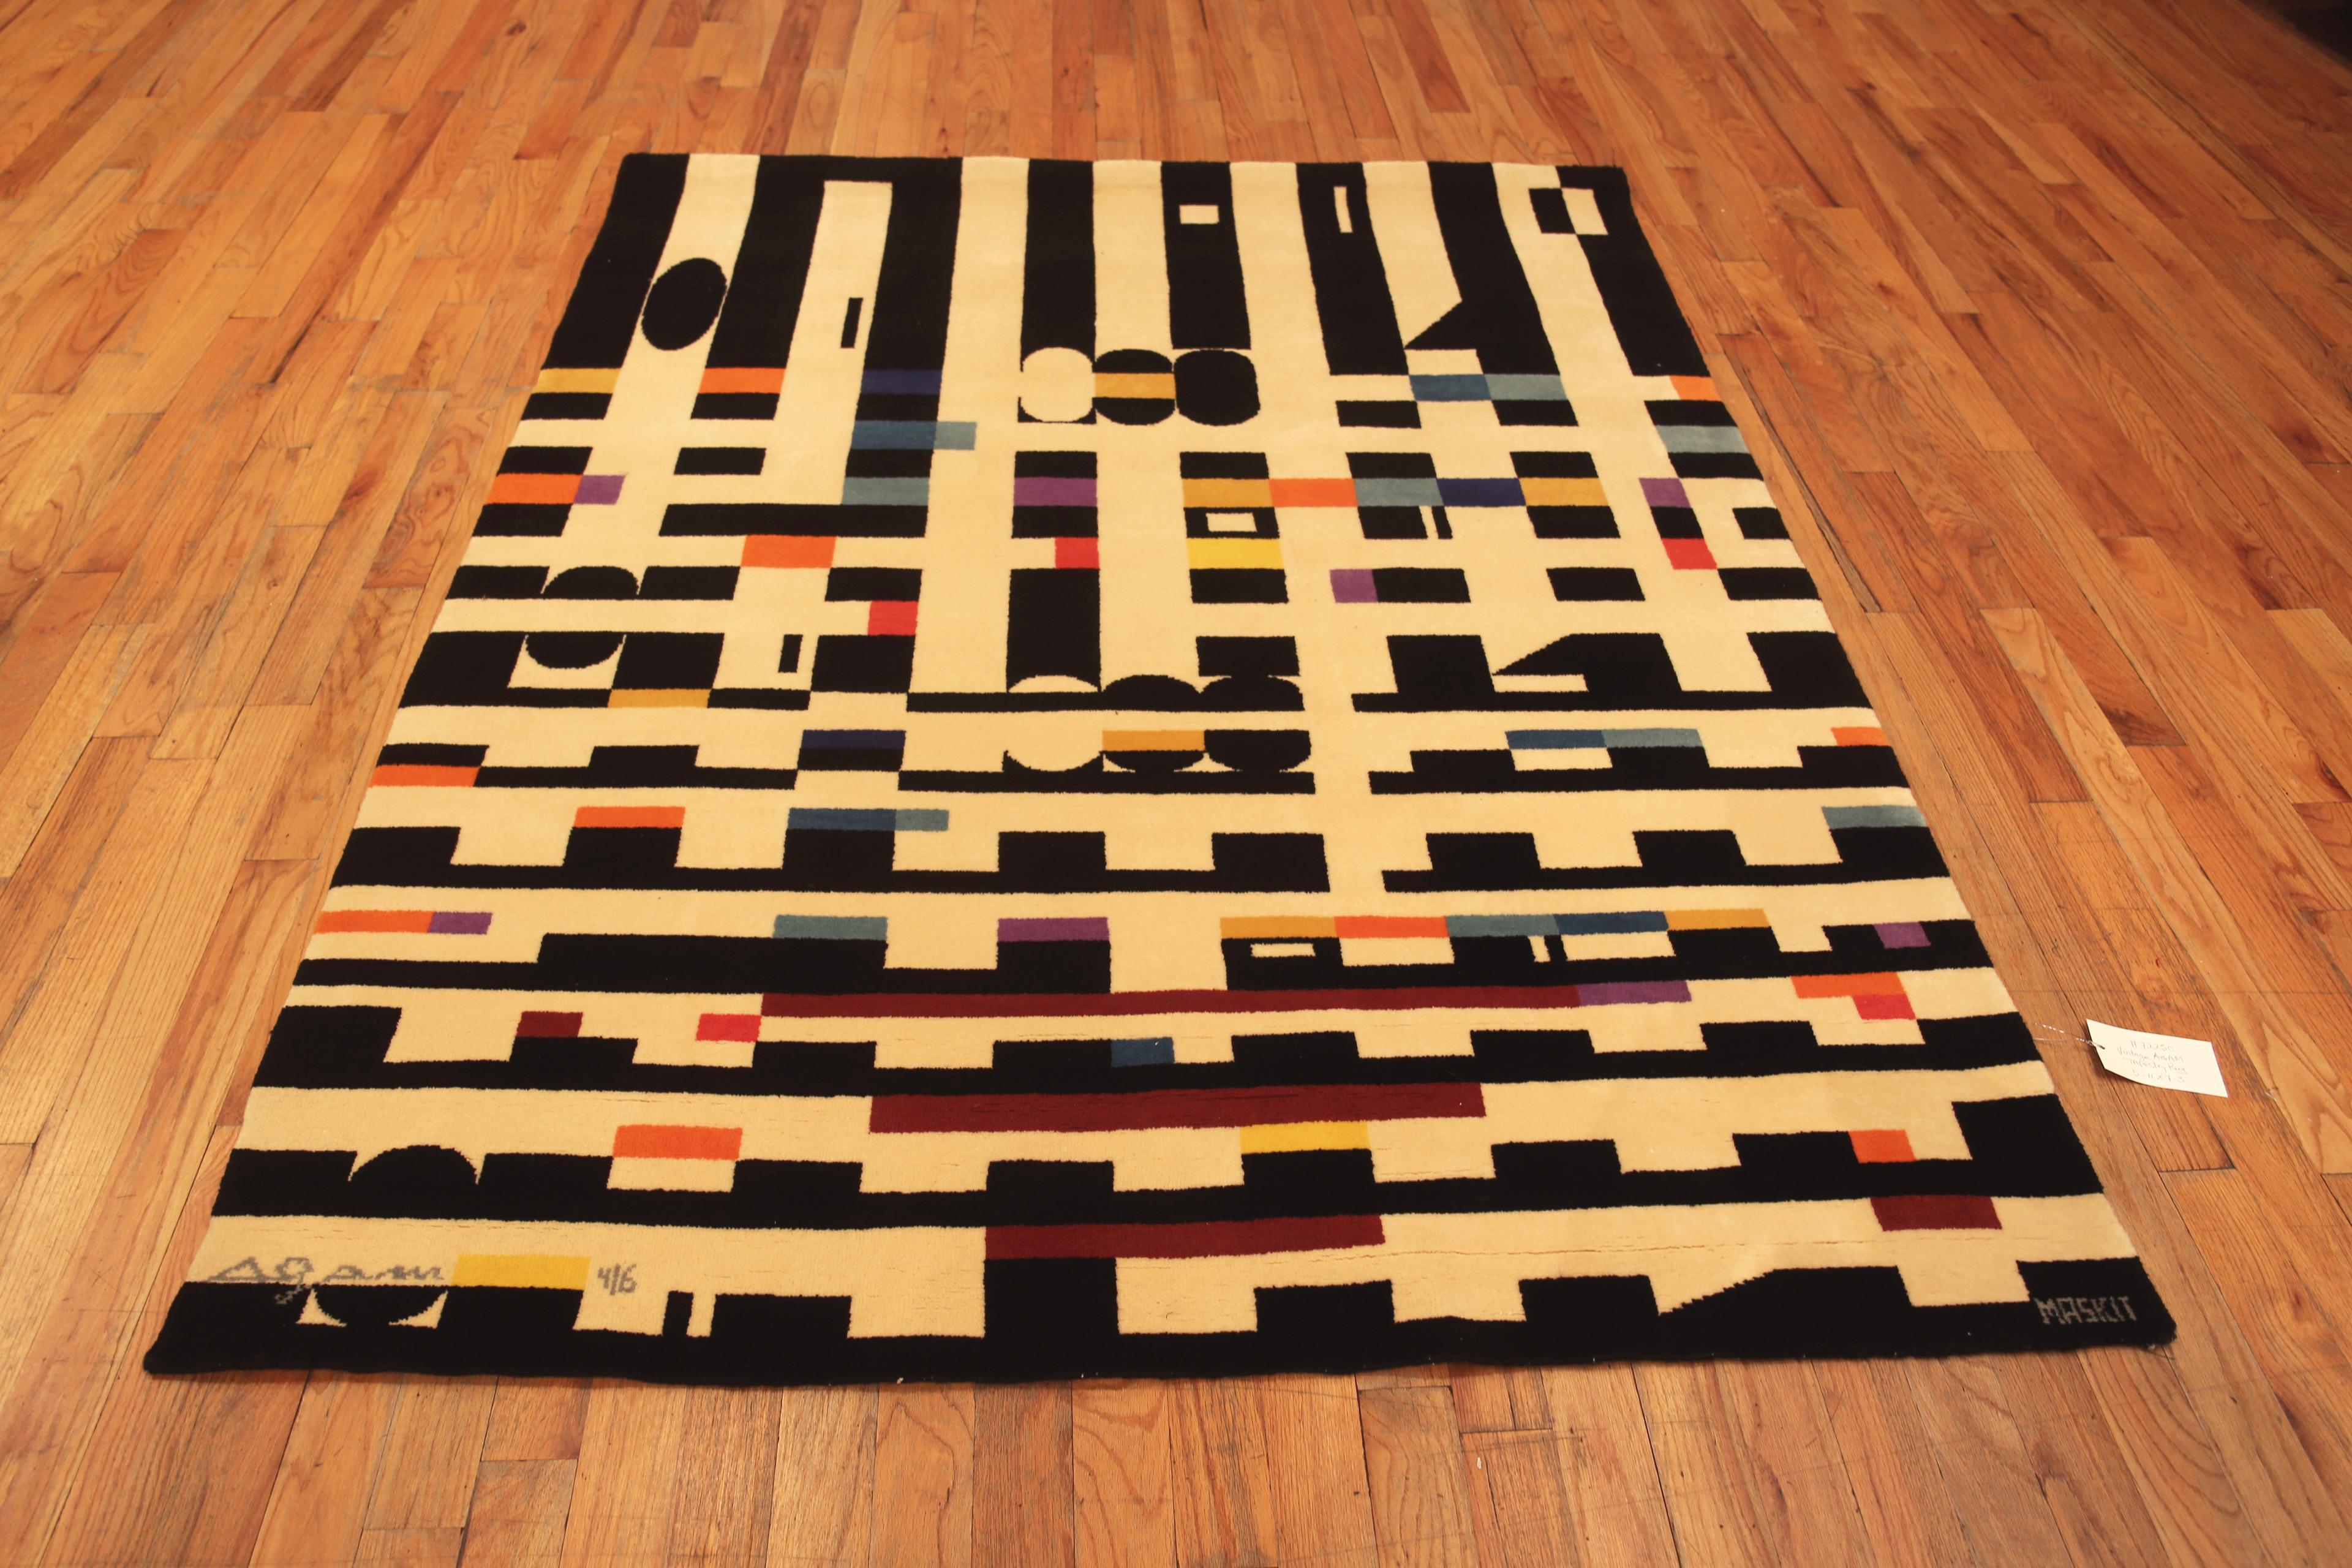 Vintage Geometric Israeli Rug By Yaacov Agam, Country of Origin: Israel, Circa date Vintage. Size: 5 ft 11 in x 7 ft 3 in (1.8 m x 2.21 m)

